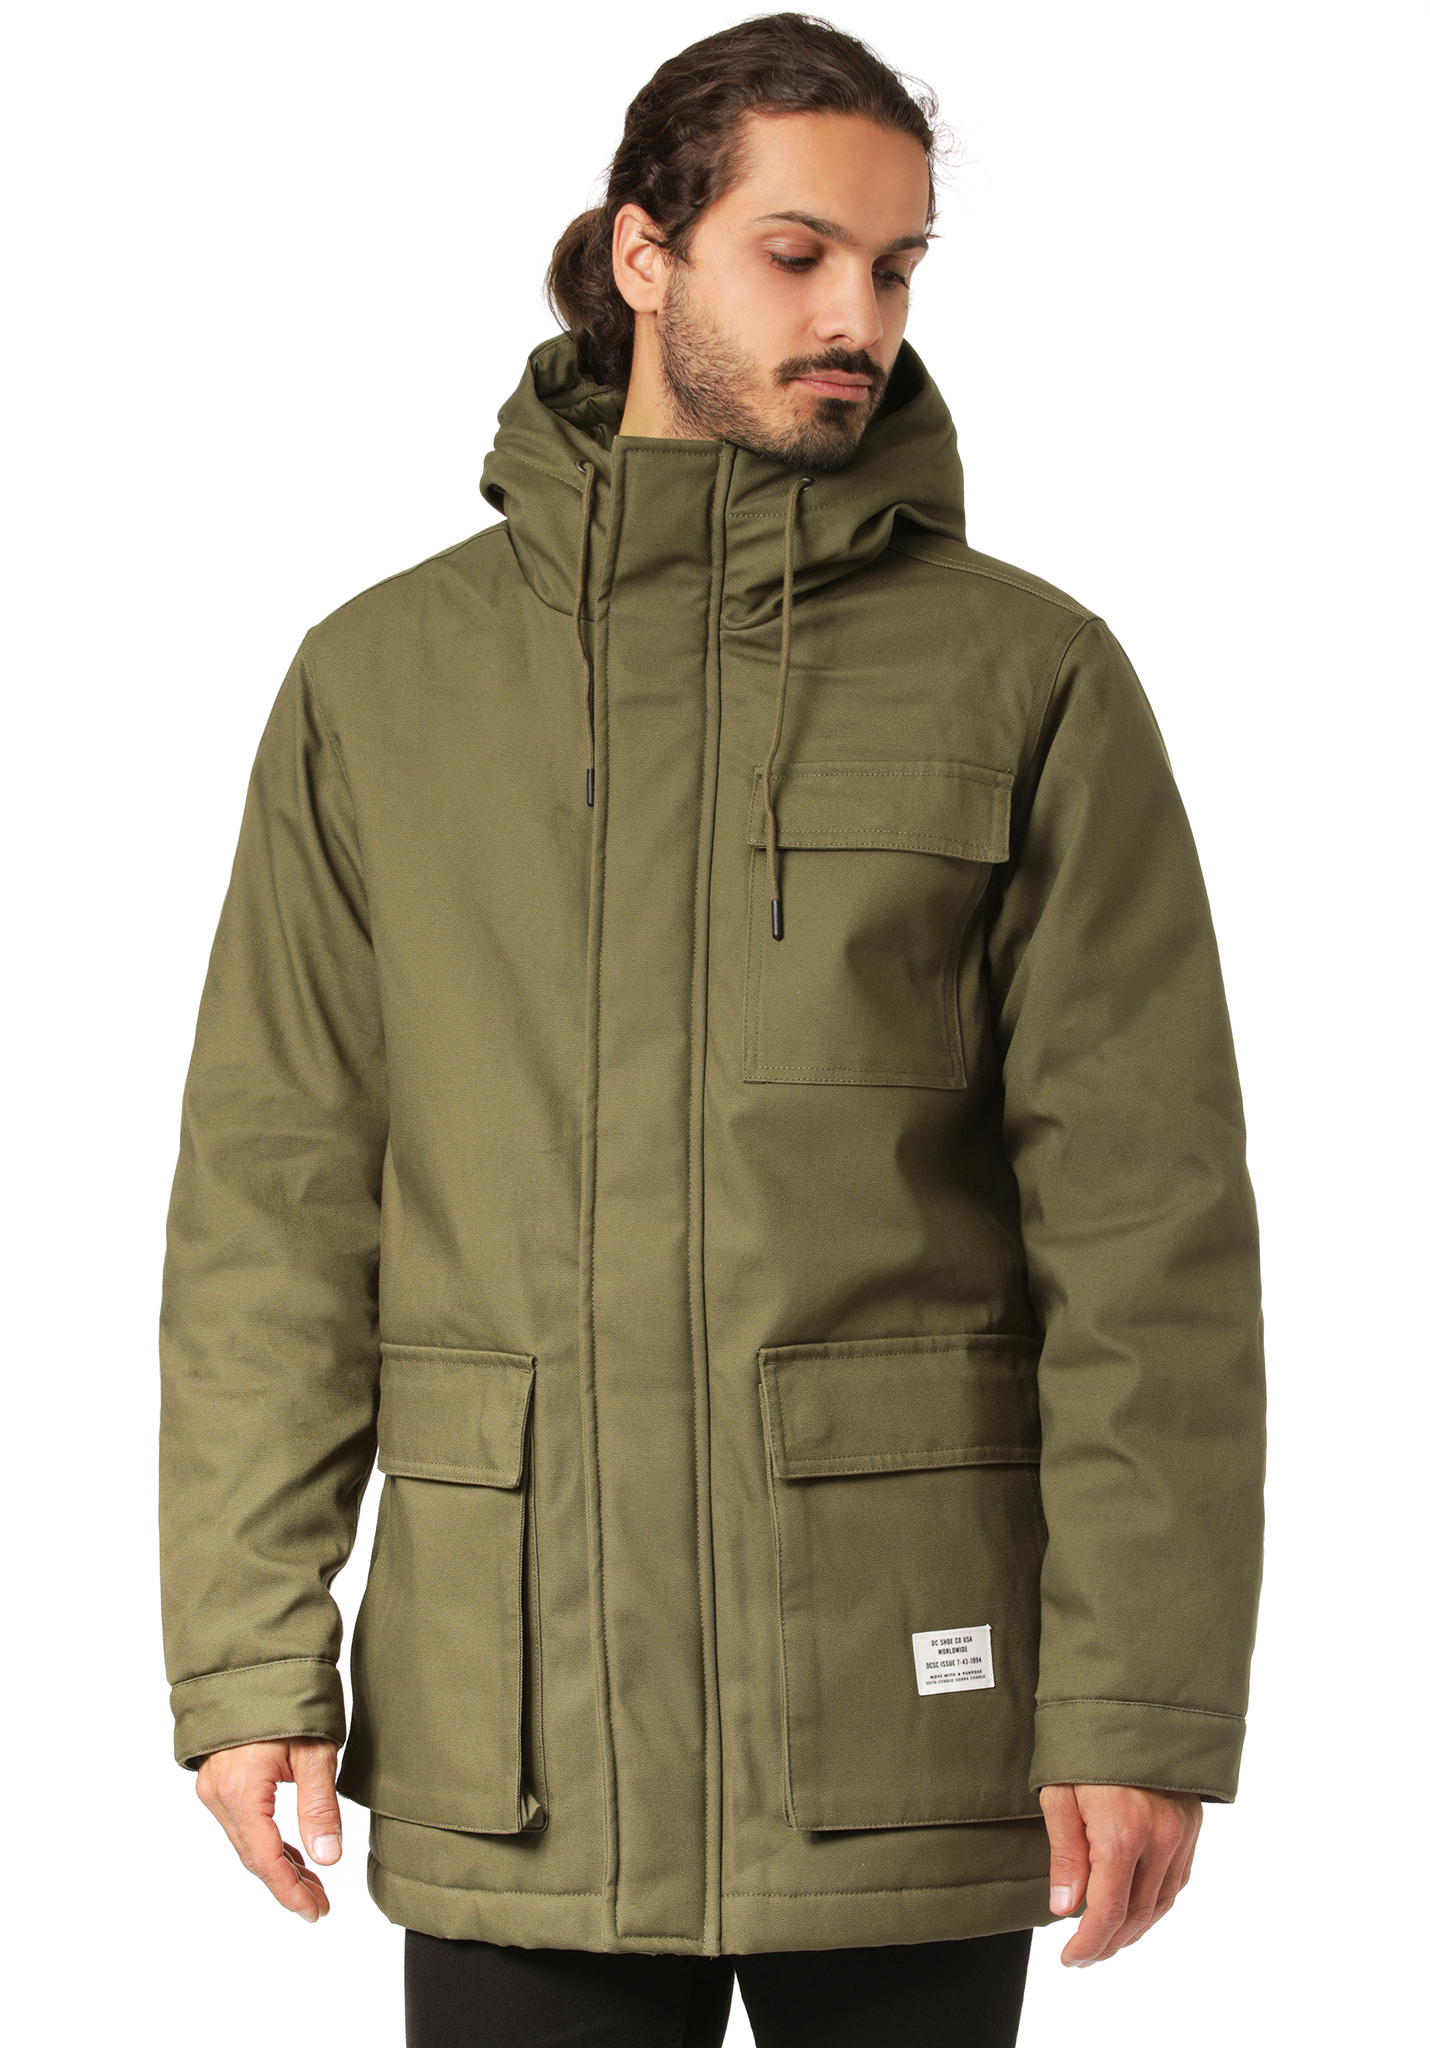 DC Canondale Jacke fatigue green XS